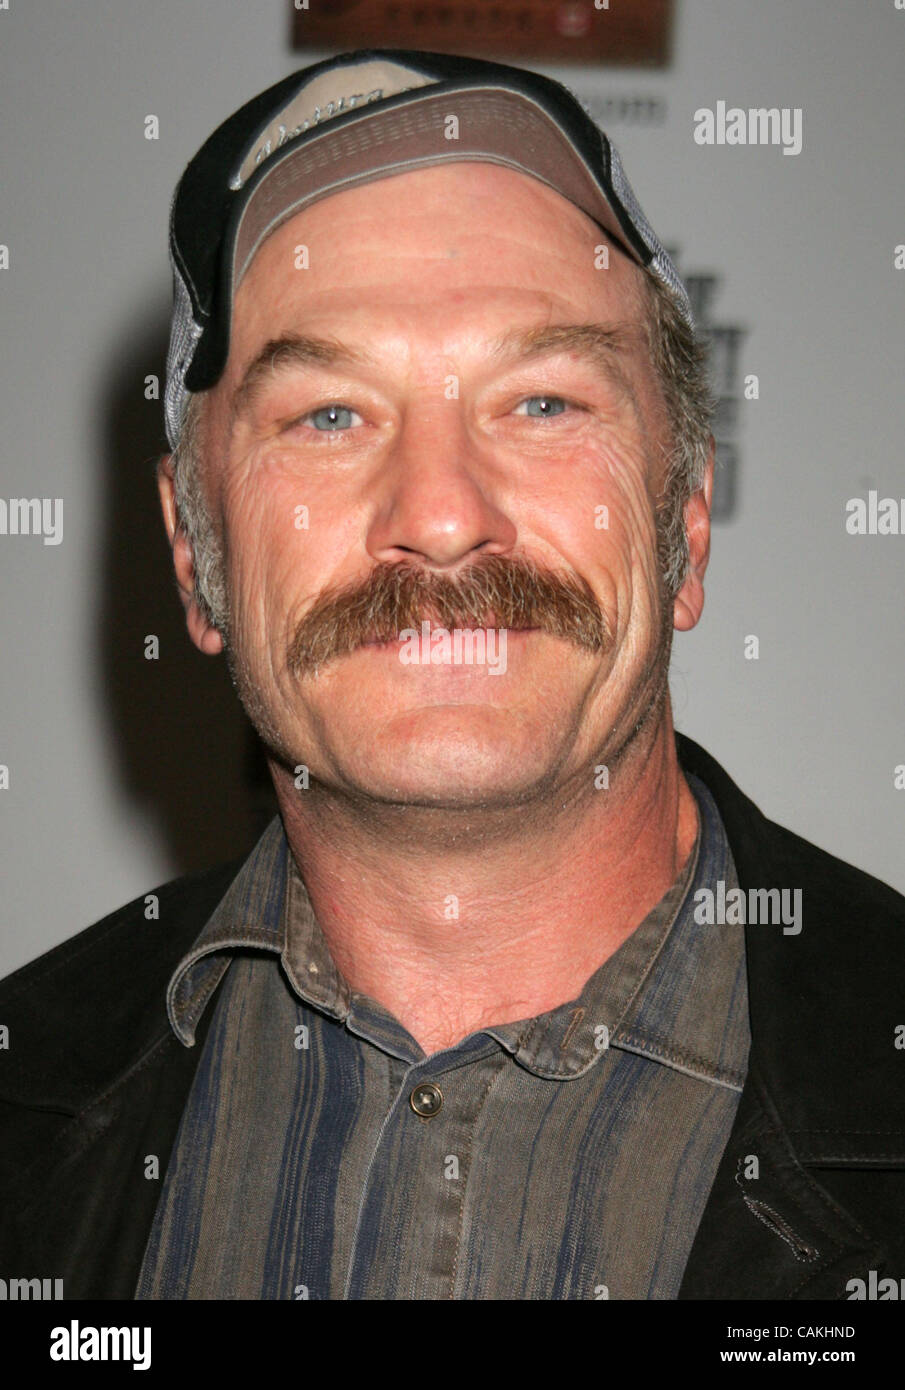 Sep 18, 2007 - New York, NY, USA -Actor TED LEVINE at the arrivals of the New York premiere of 'The Assassination of Jesse James by the Coward Robert Ford' held at the Ziegfeld Theater. (Credit Image: © Nancy Kaszerman/ZUMA Press) Stock Photo